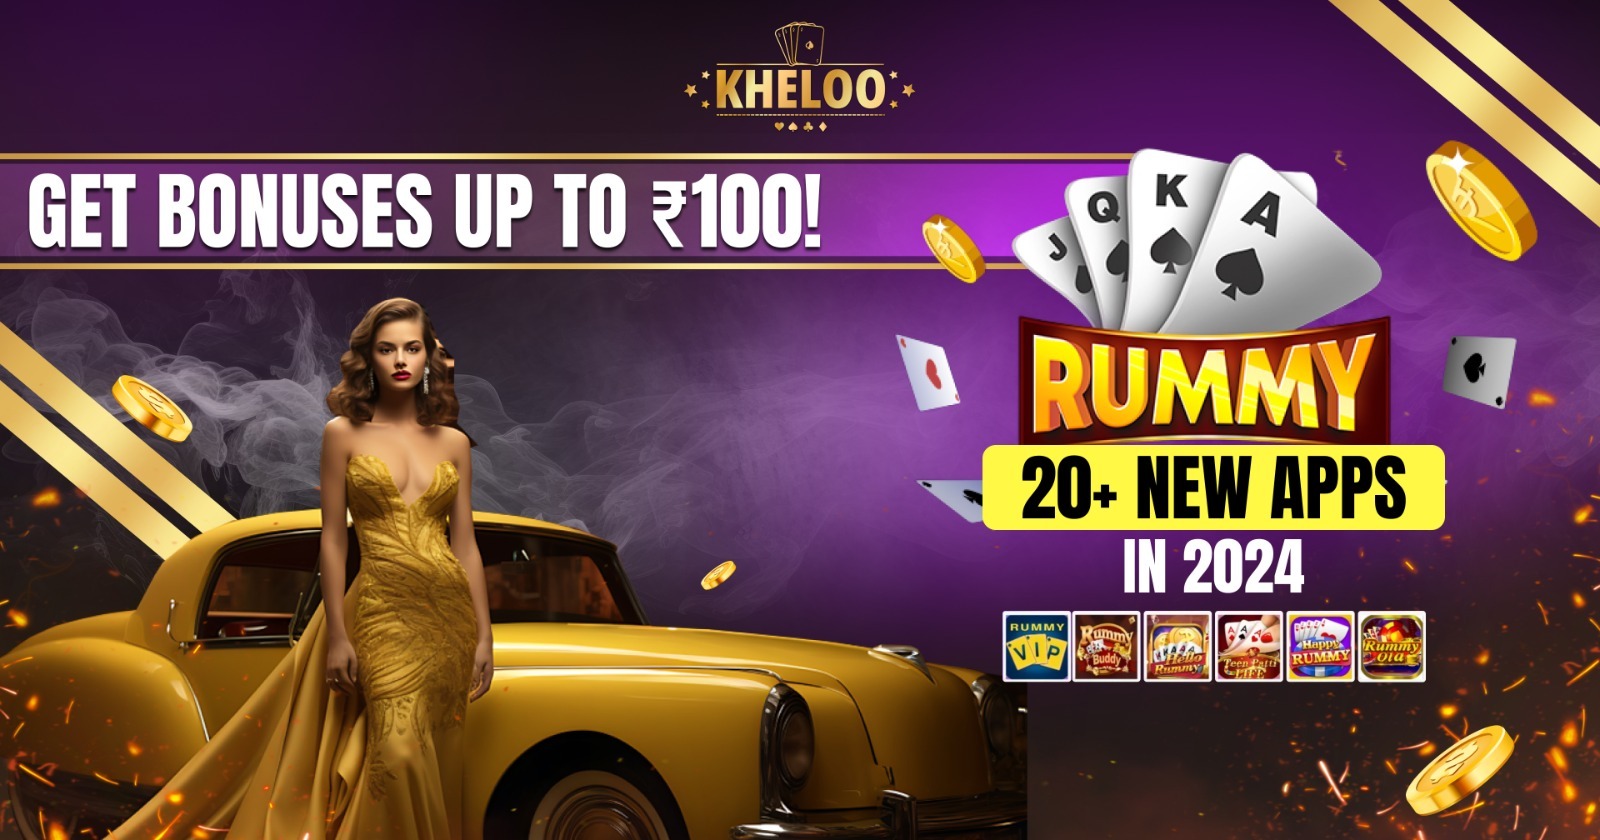 20+ New Rummy Apps in 2024: Get Bonuses Up to ₹195! - Kheloo